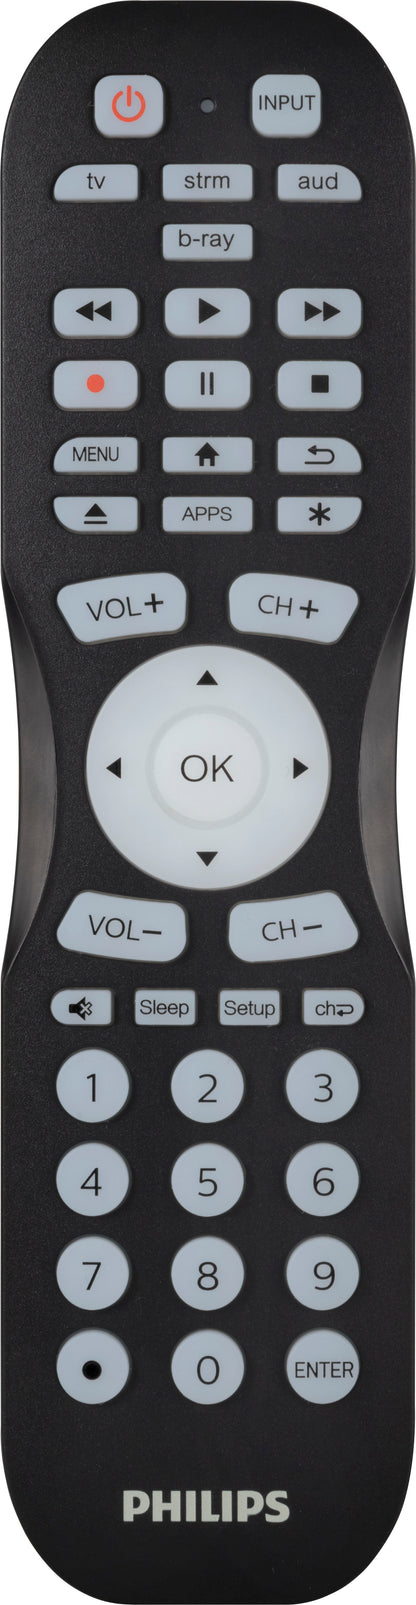 Philips - 4 Device Universal Remote Control Bluetooth Programmable